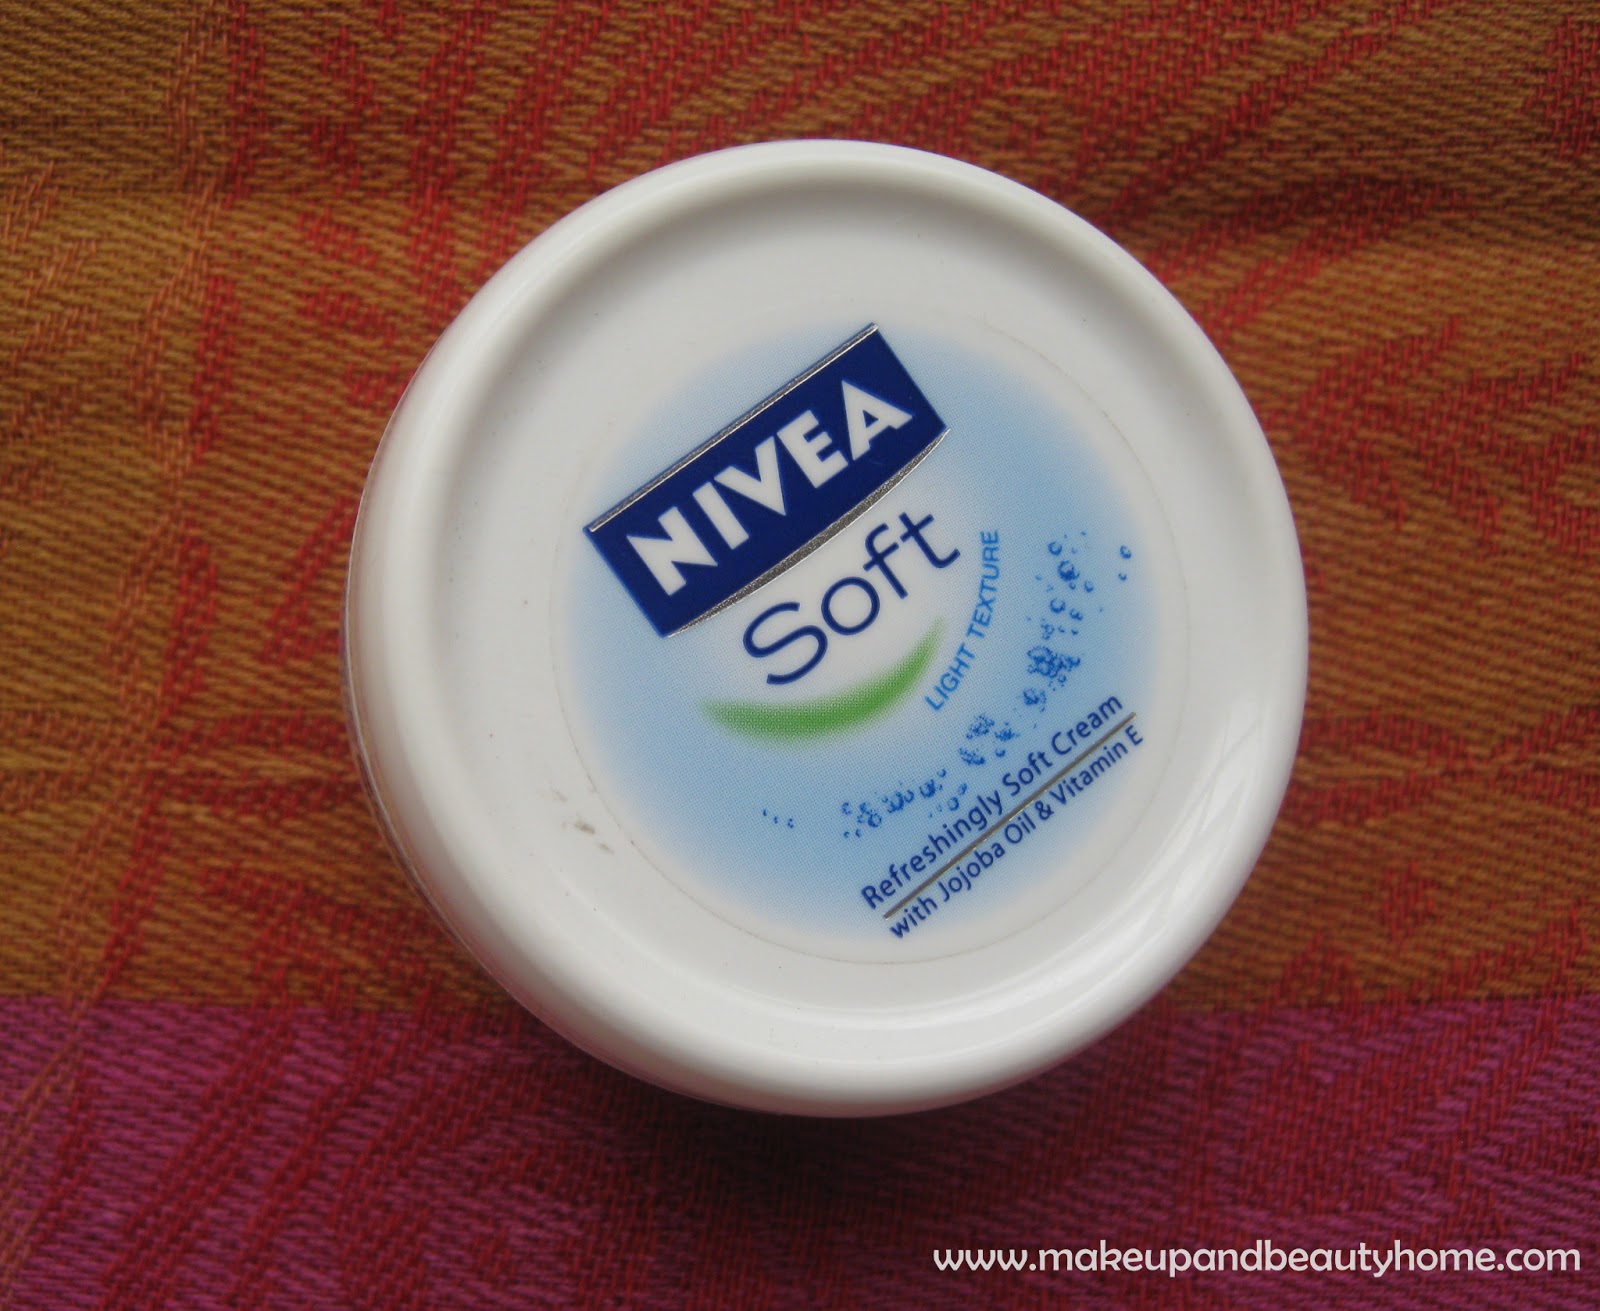 Can Nivea Cream Be Used On Your Face